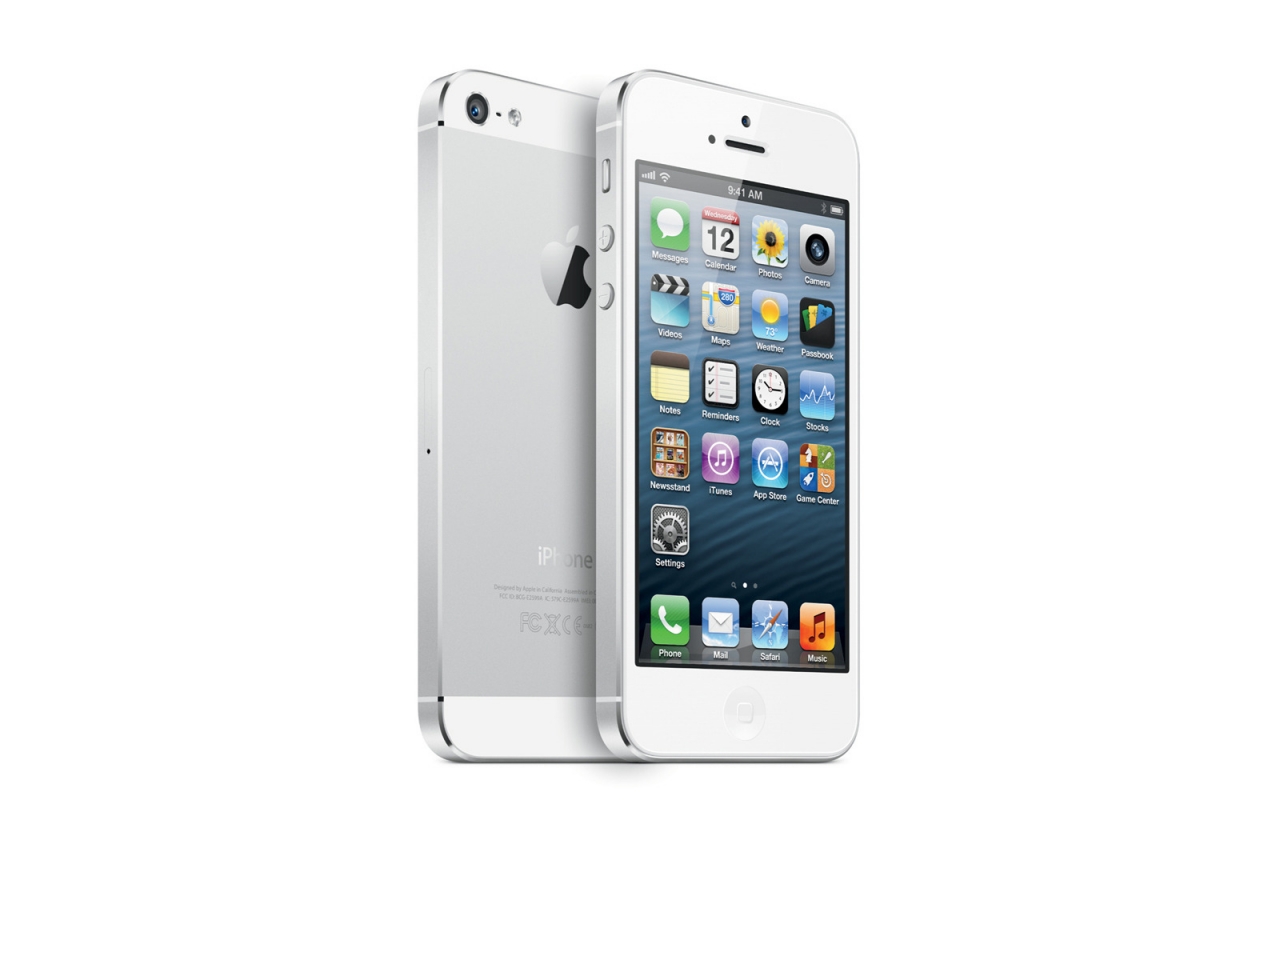 White iPhone 5 for 1280 x 960 resolution